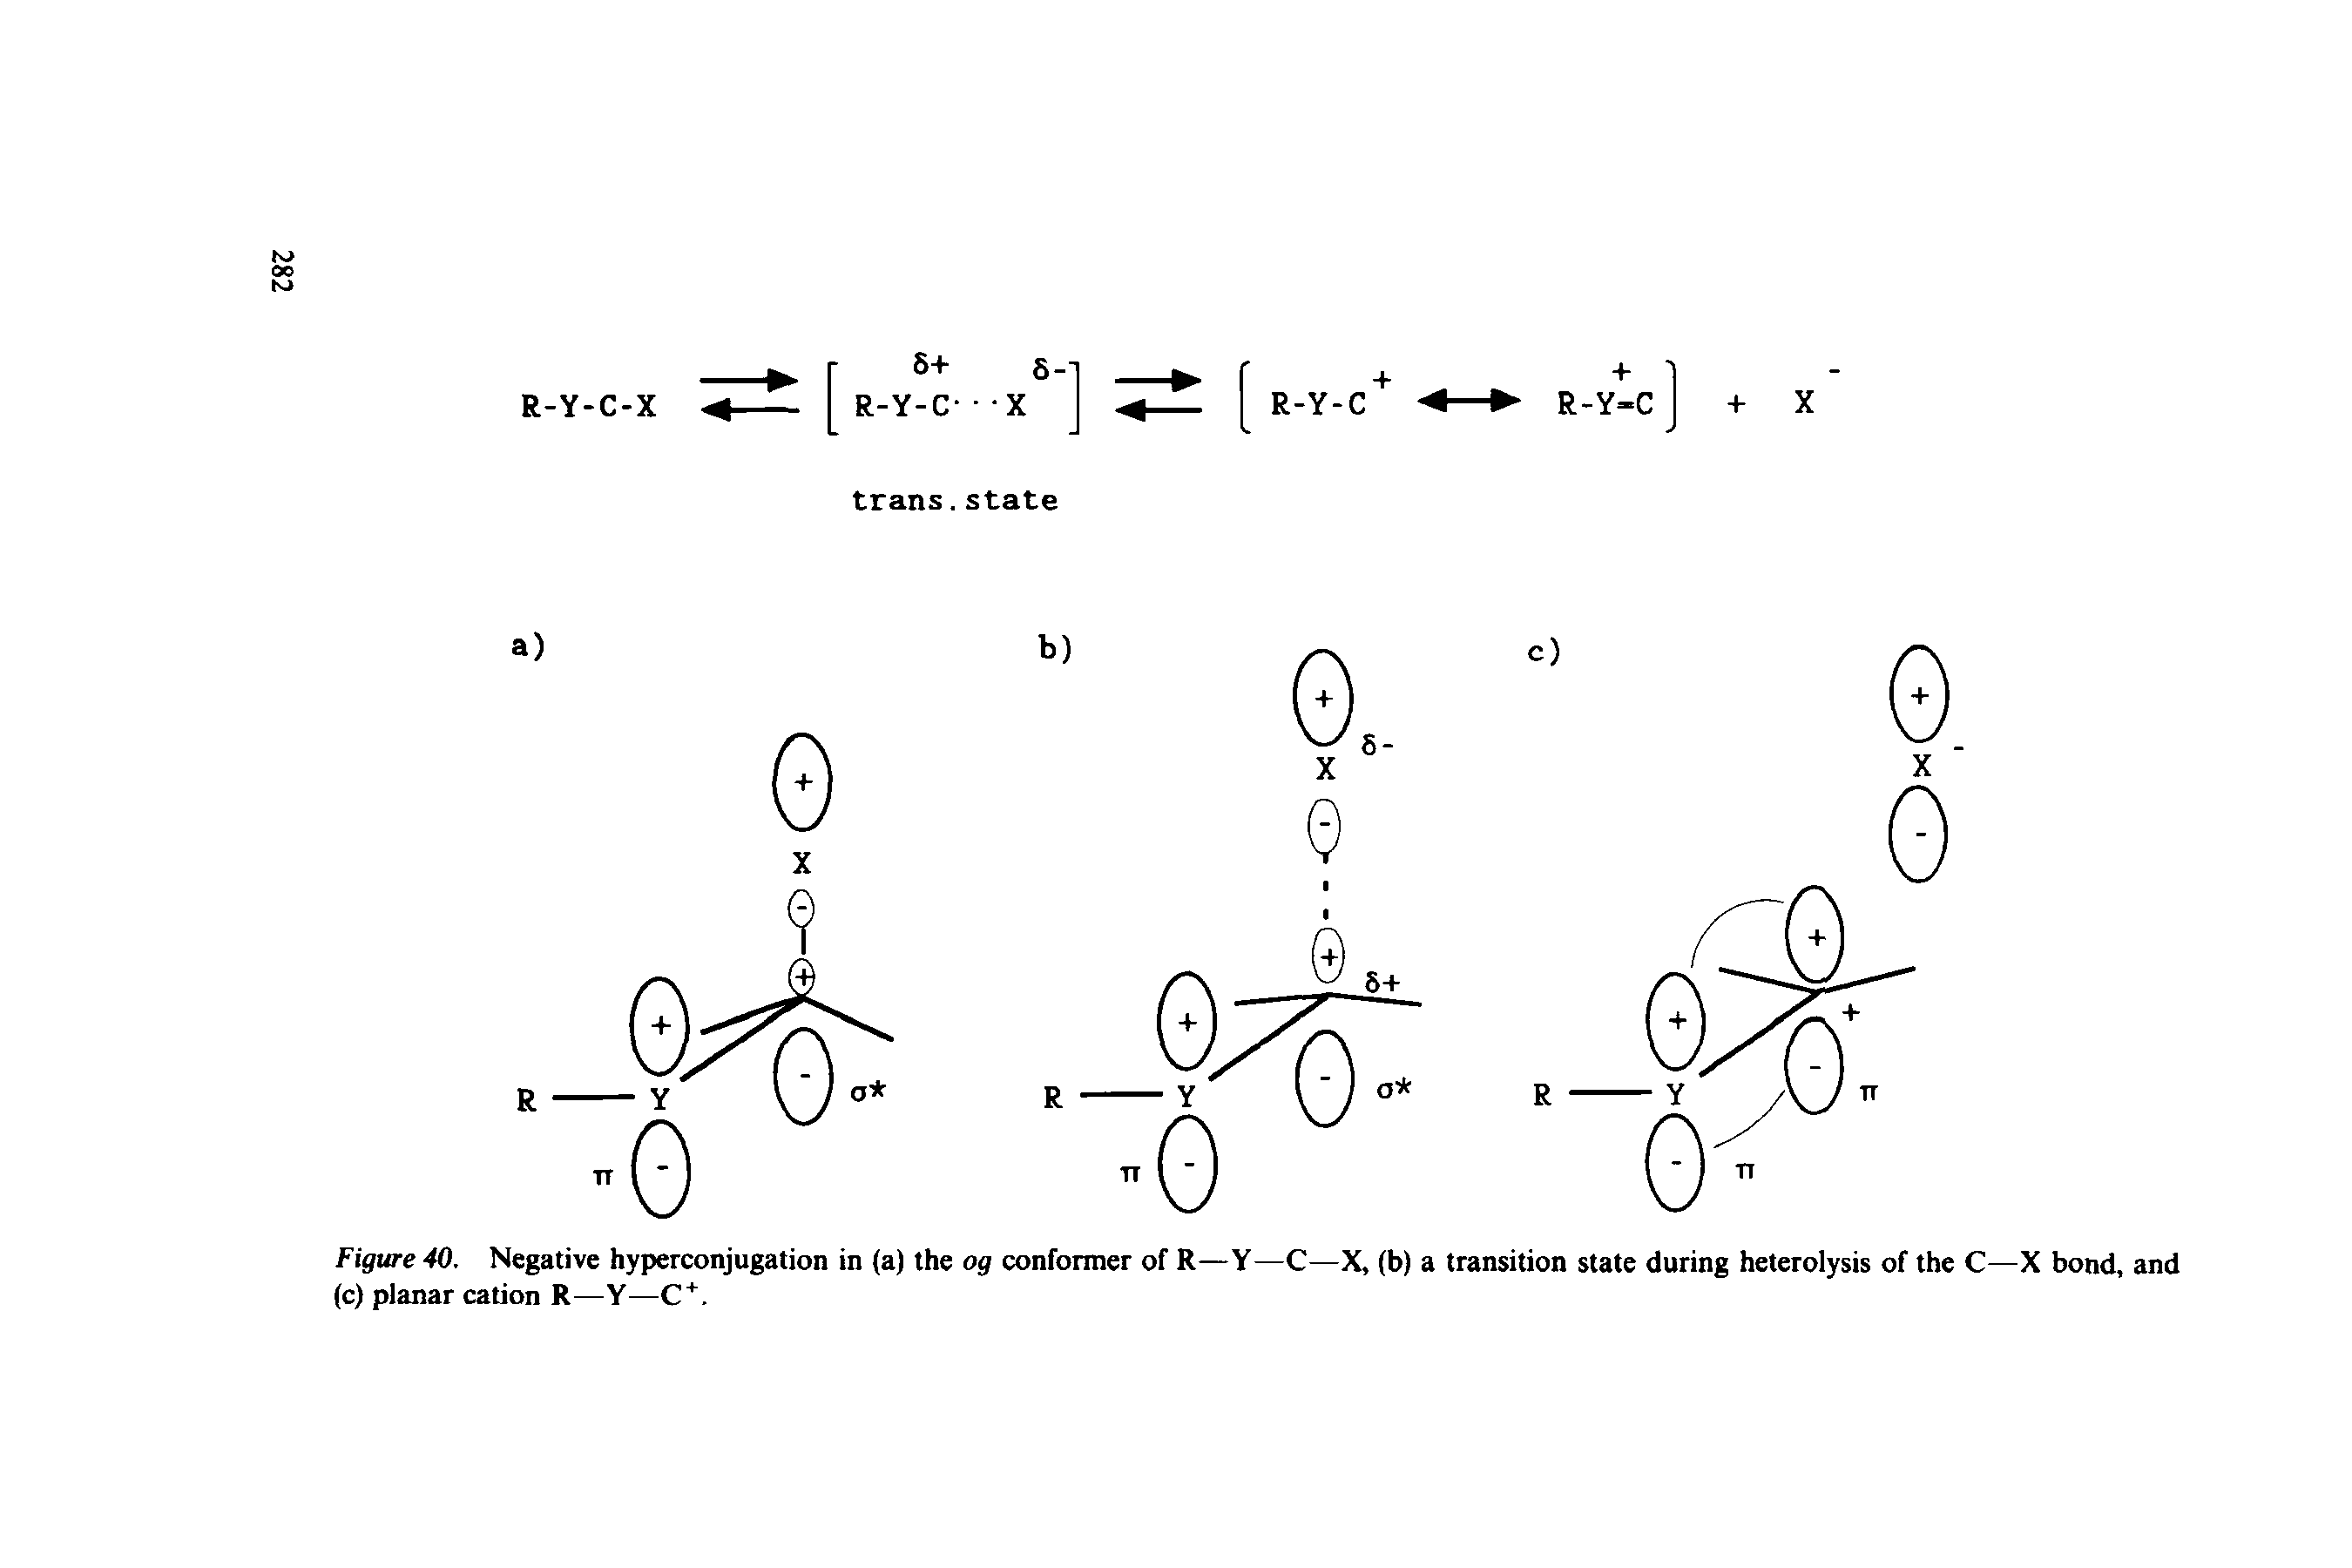 Figure 40. Negative hyperconjugation in (a) the og conformer of R—Y—C—X, (b) a transition state during heterolysis of the C—X bond, and (c) planar cation R—Y—C. ...